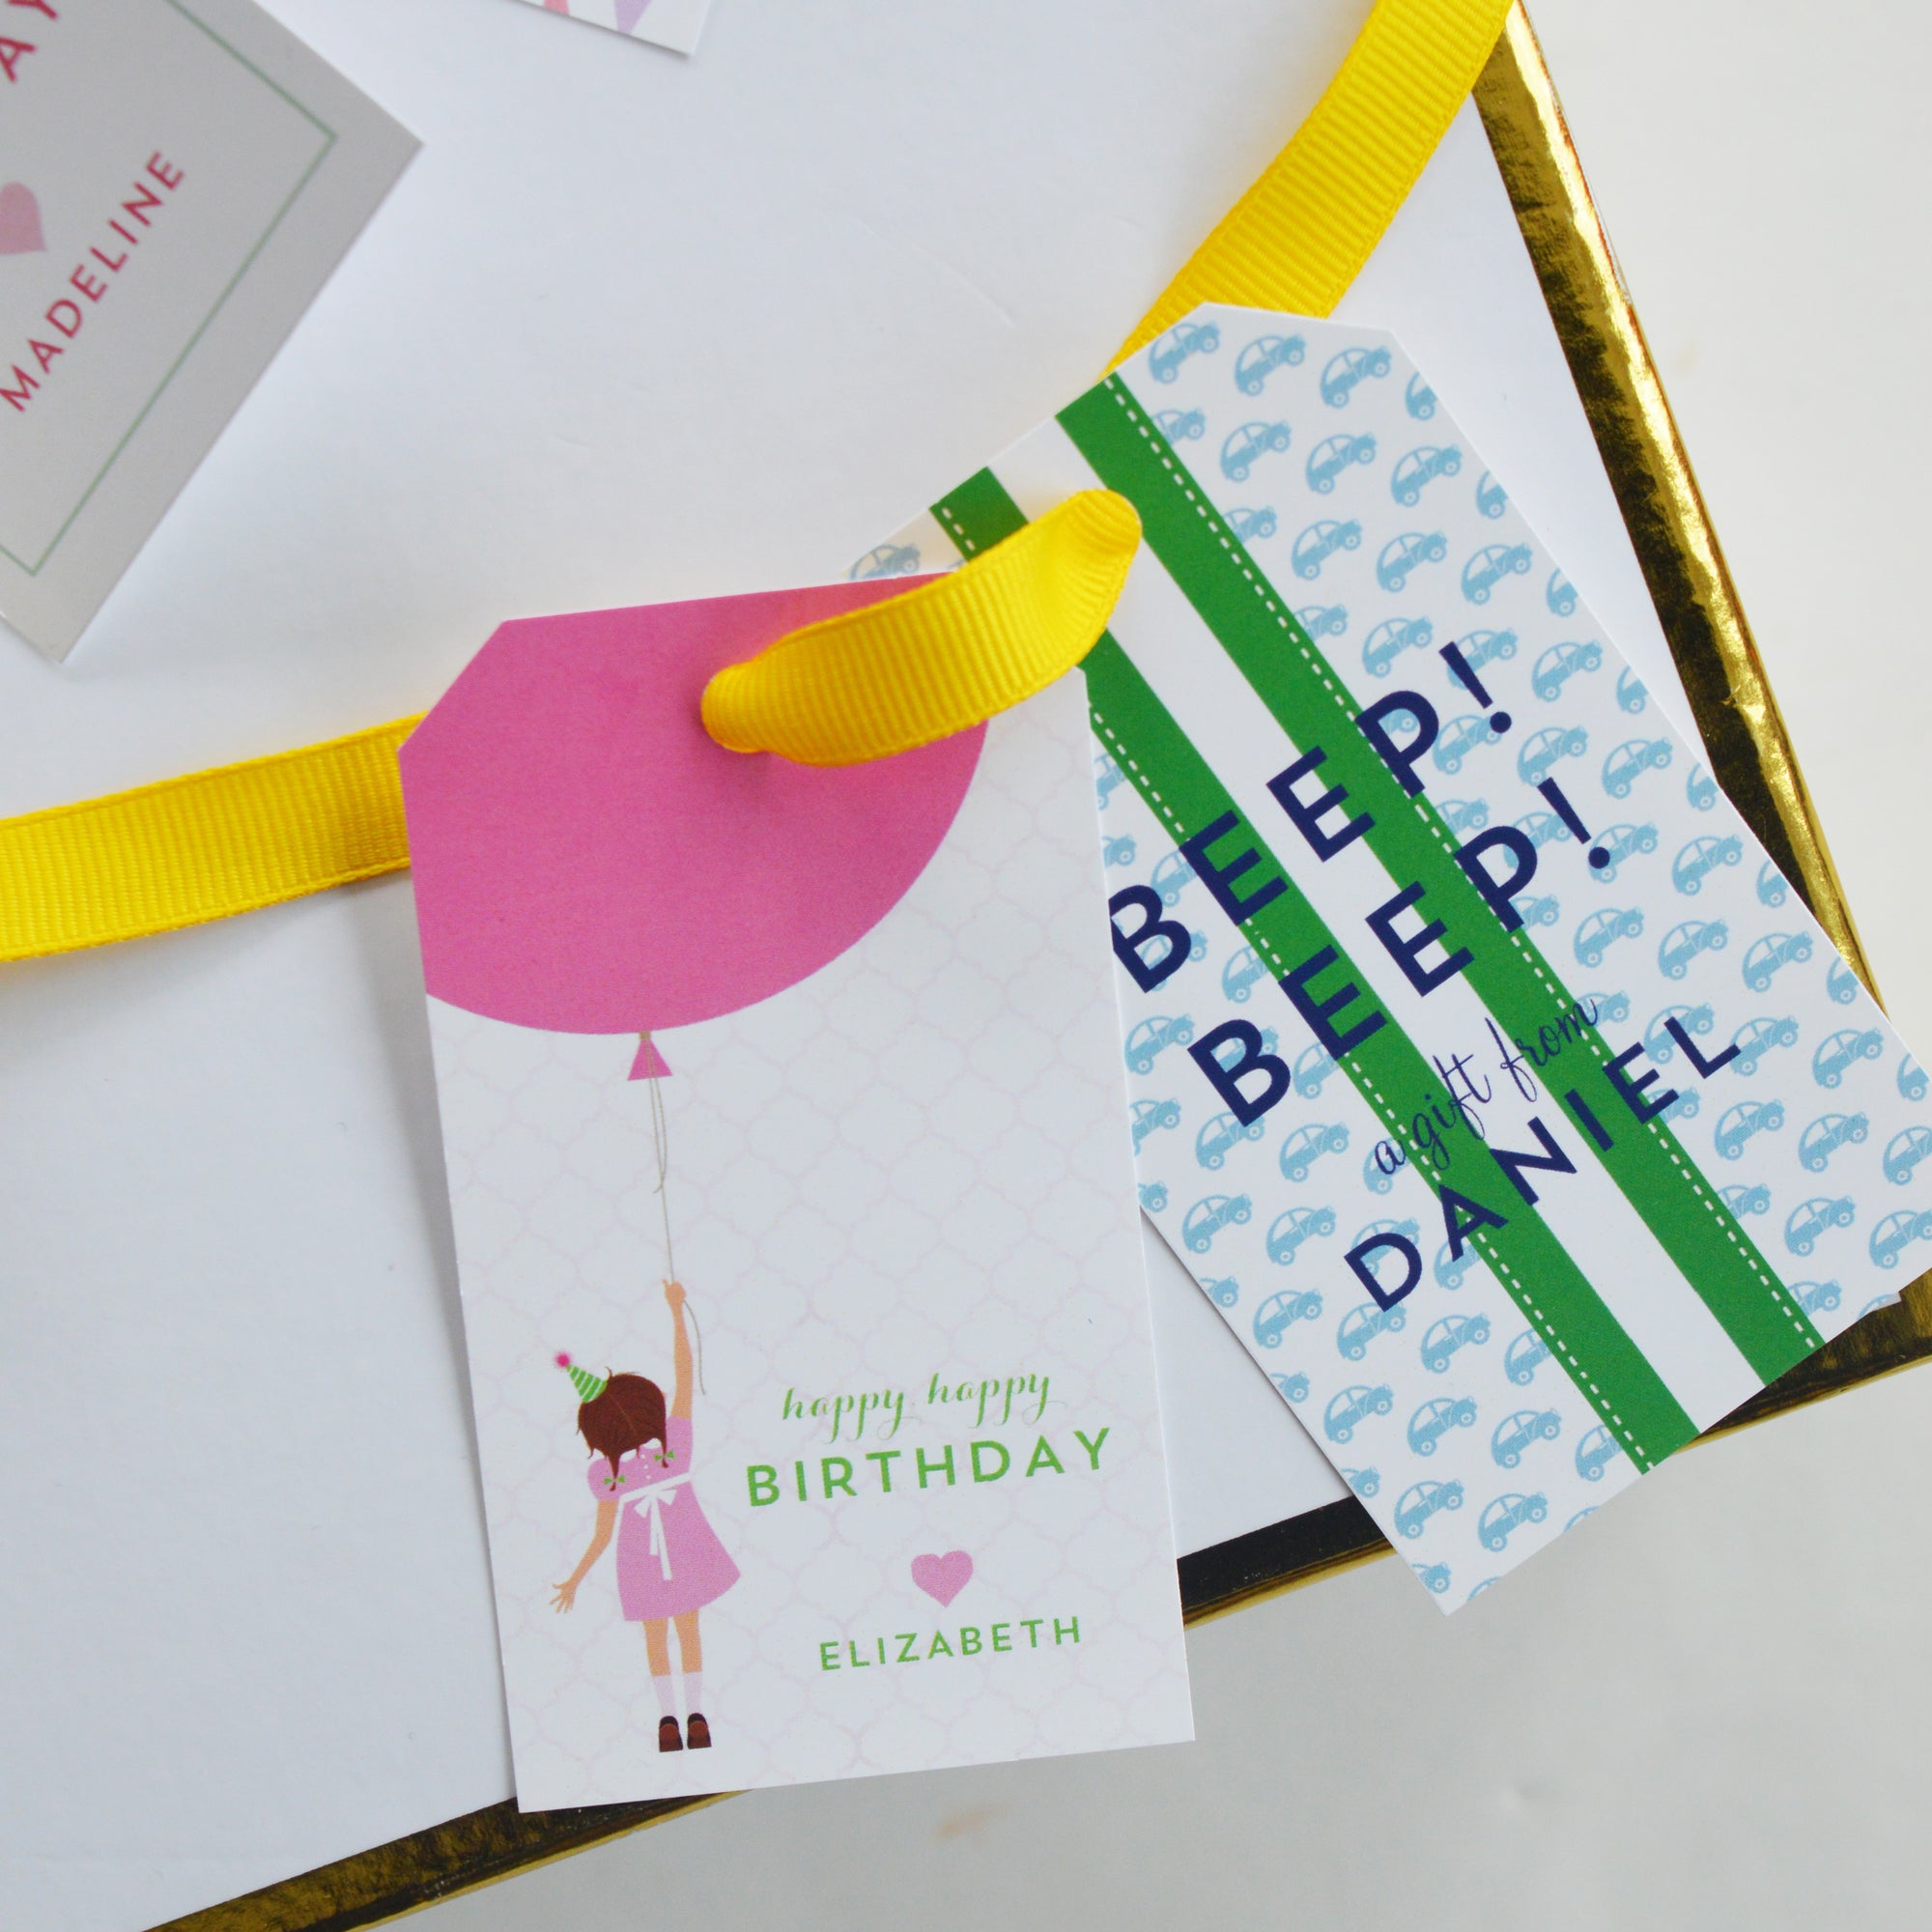 Creative Gift Wrapping Ideas for Kids' Birthday Gifts